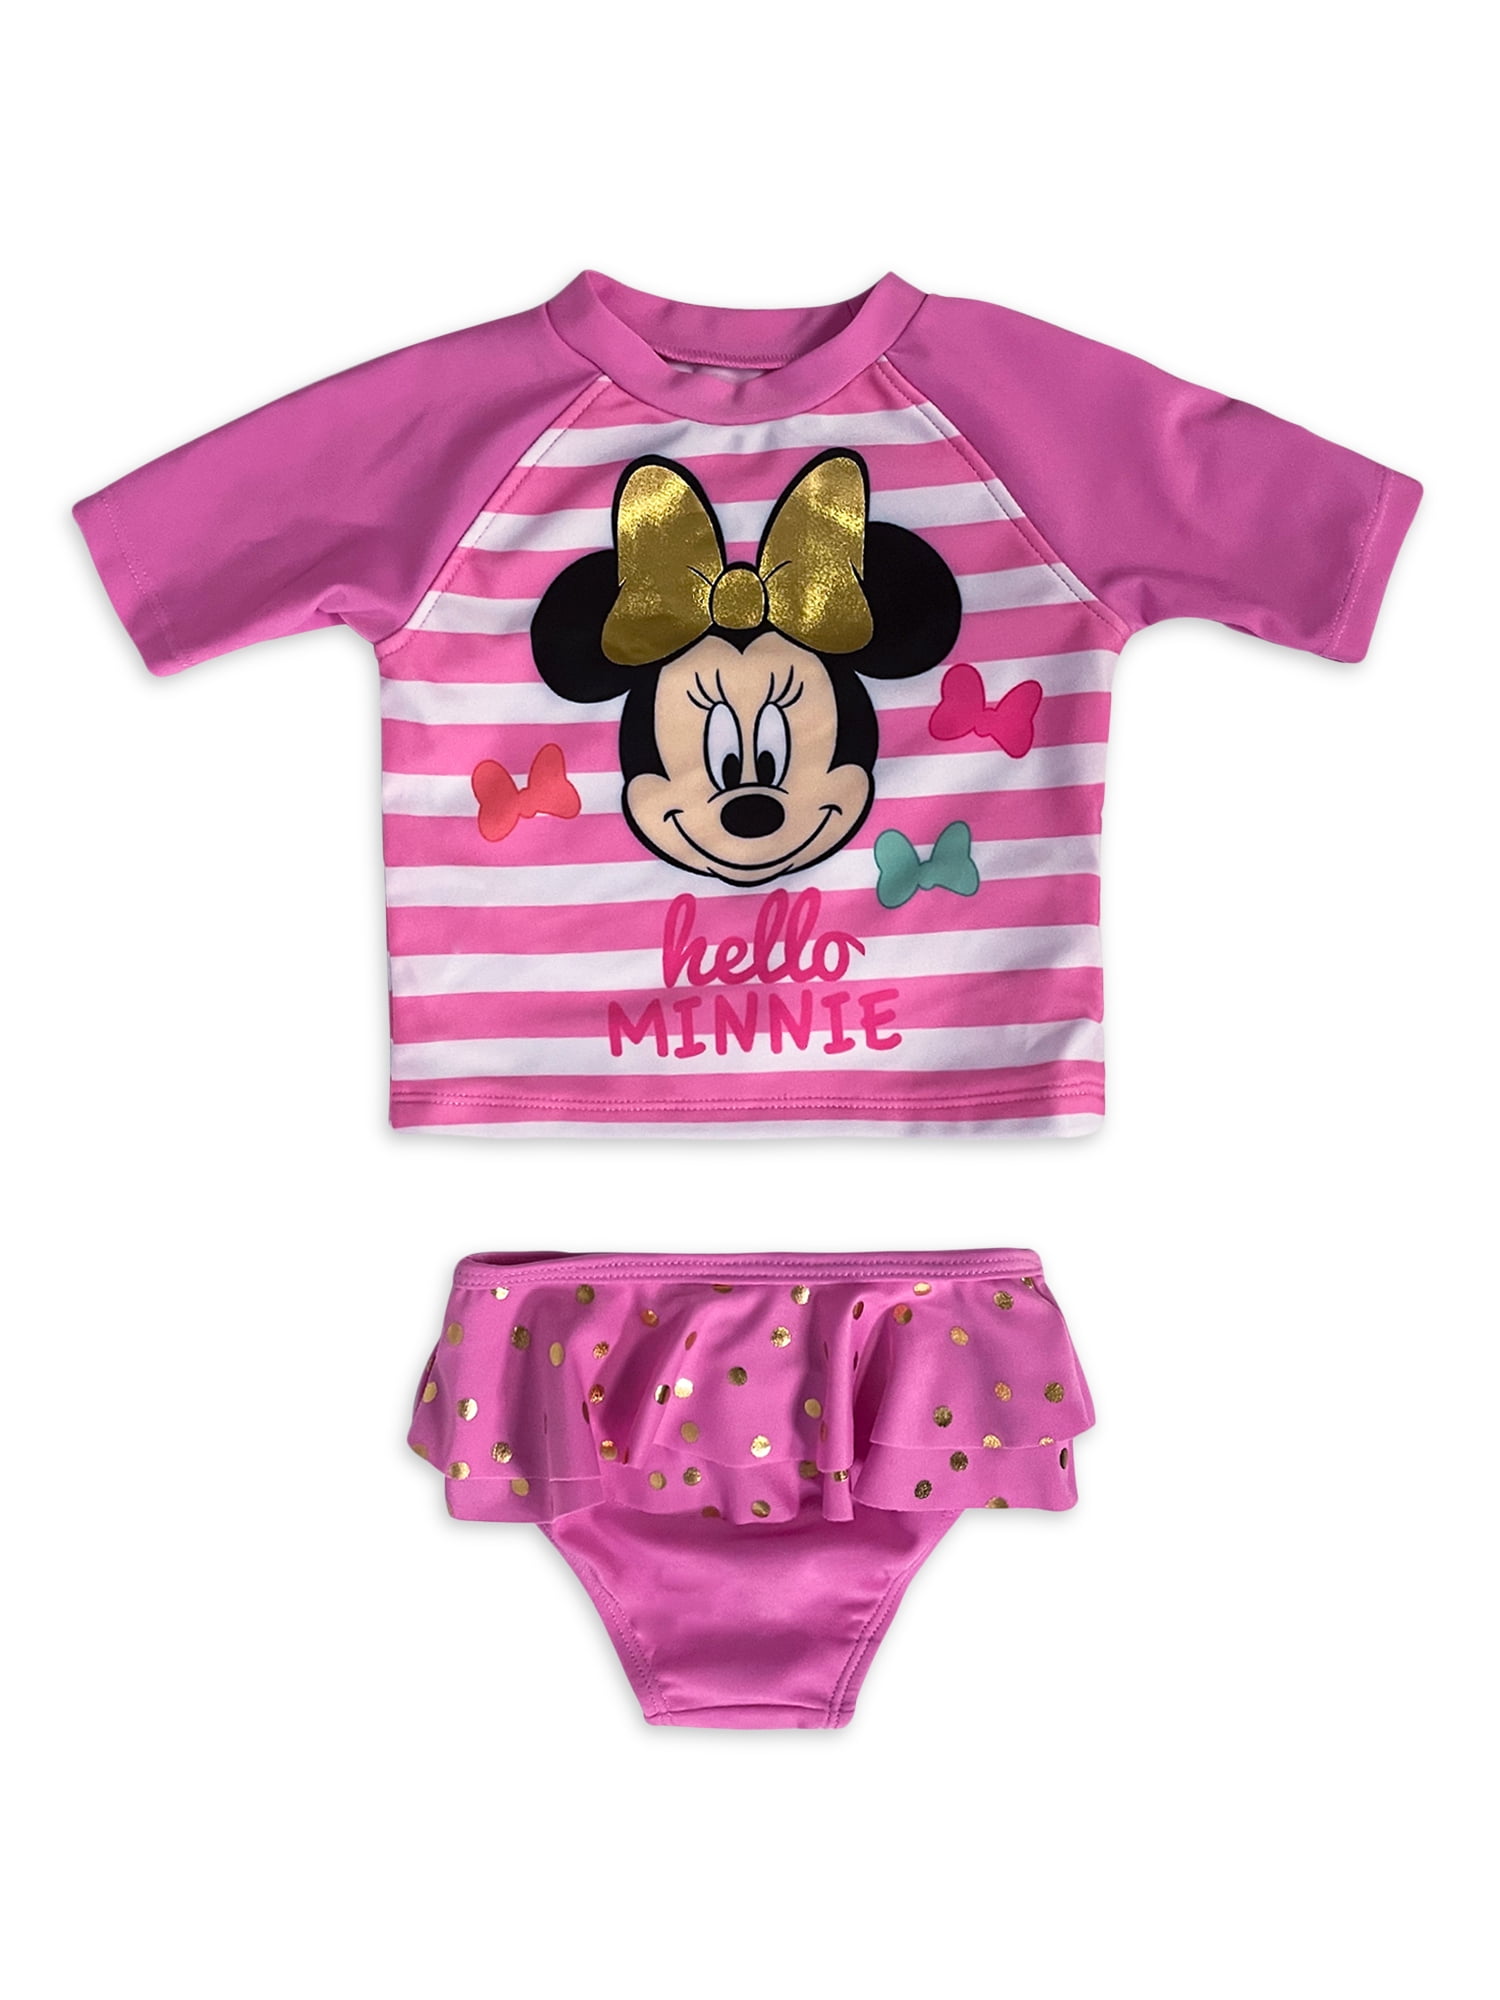 baby girl daisy minnie mouse uv upf 40 surfsuit sunsuit hot pink sev sizes NEW 